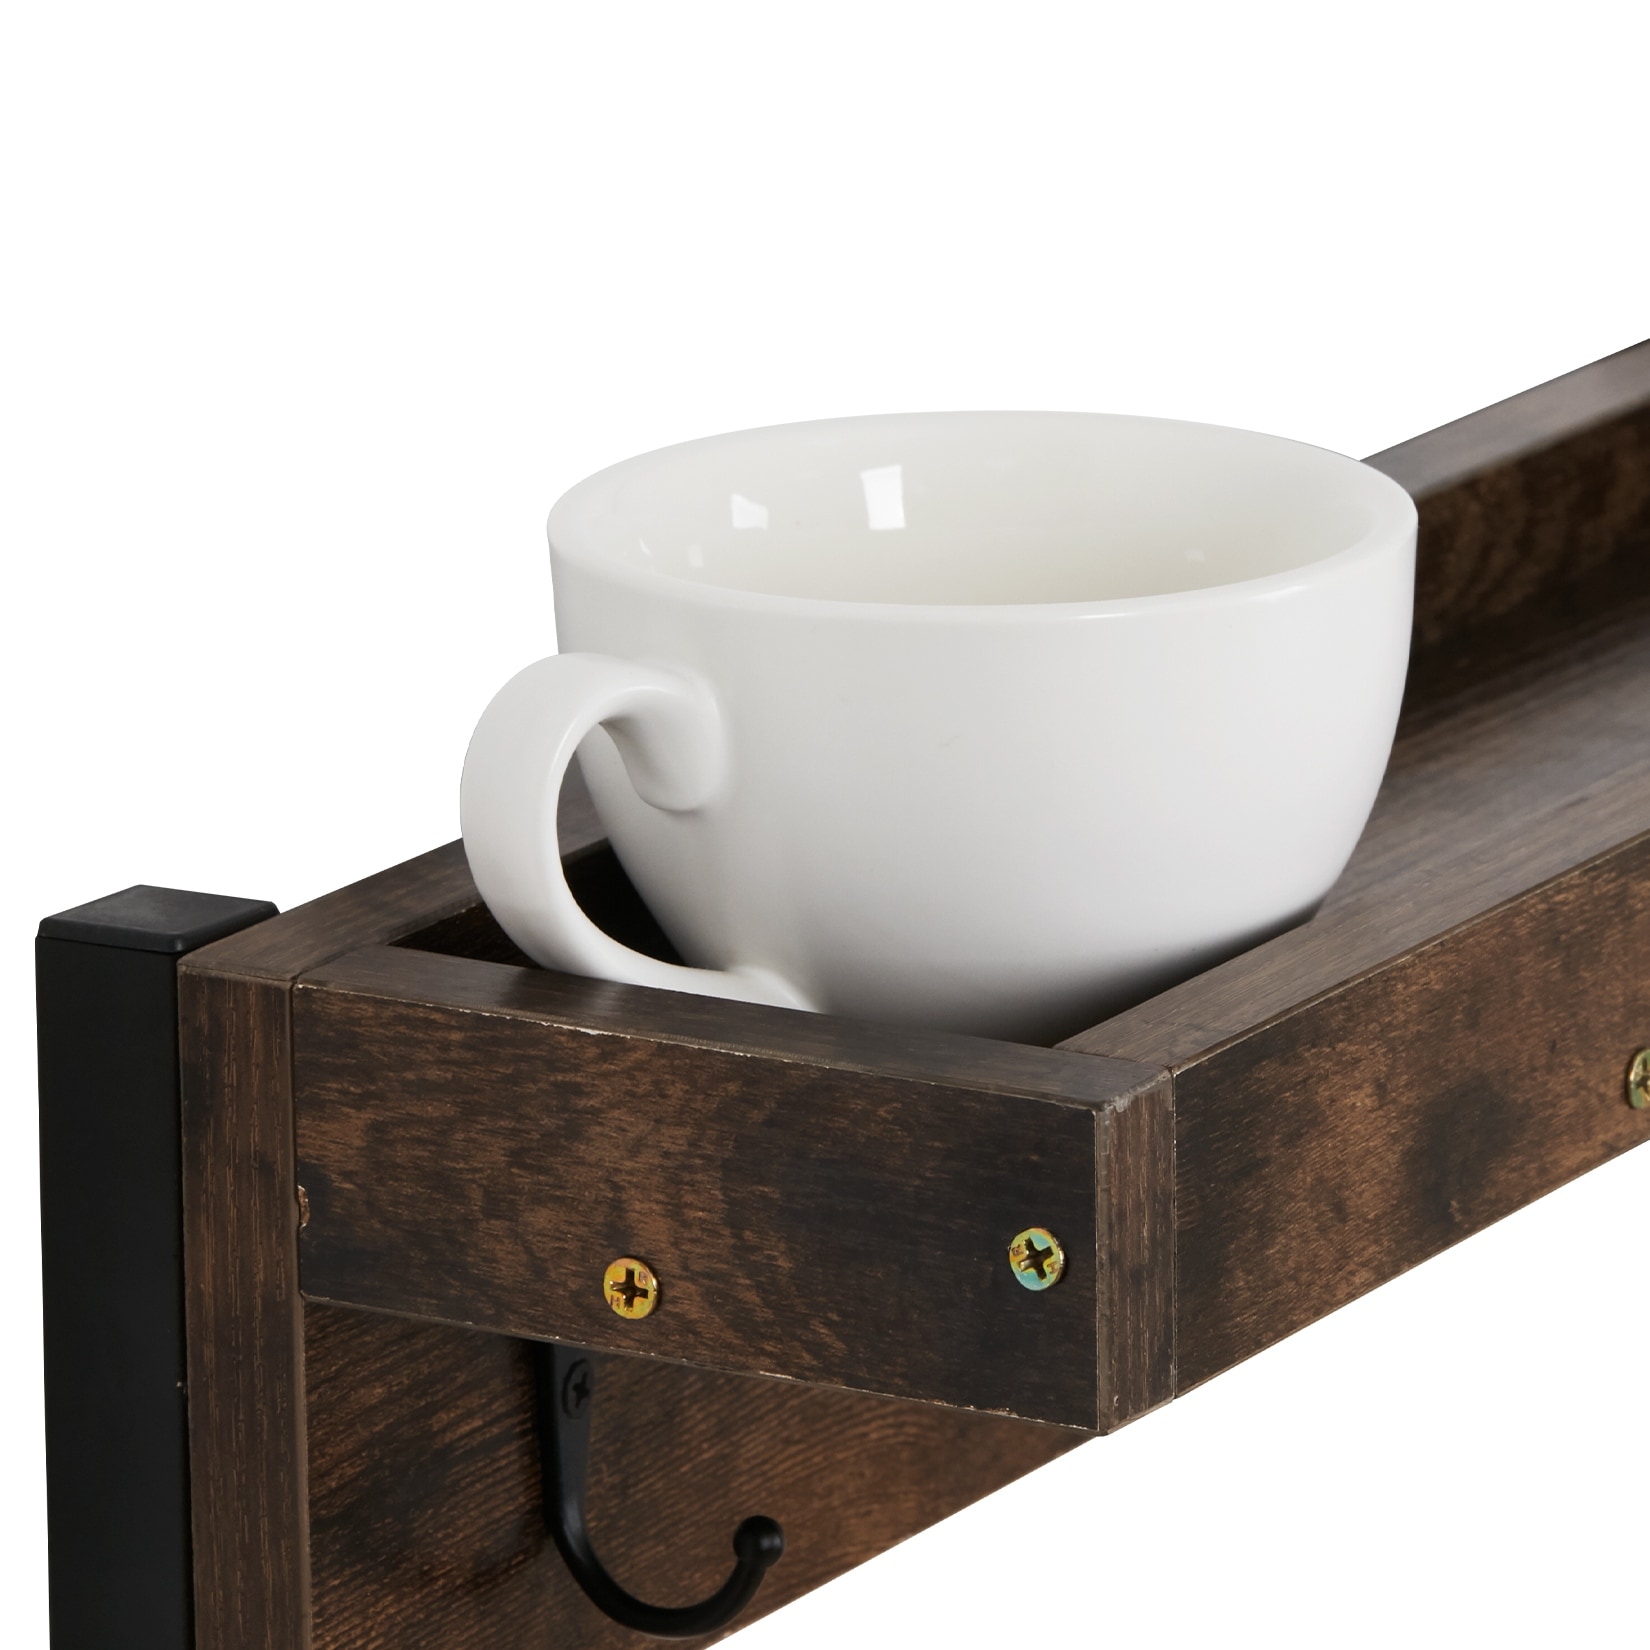 Rustic Coffee Cup Rack Table Top, Coffee Mug Holder, Kitchen Spice